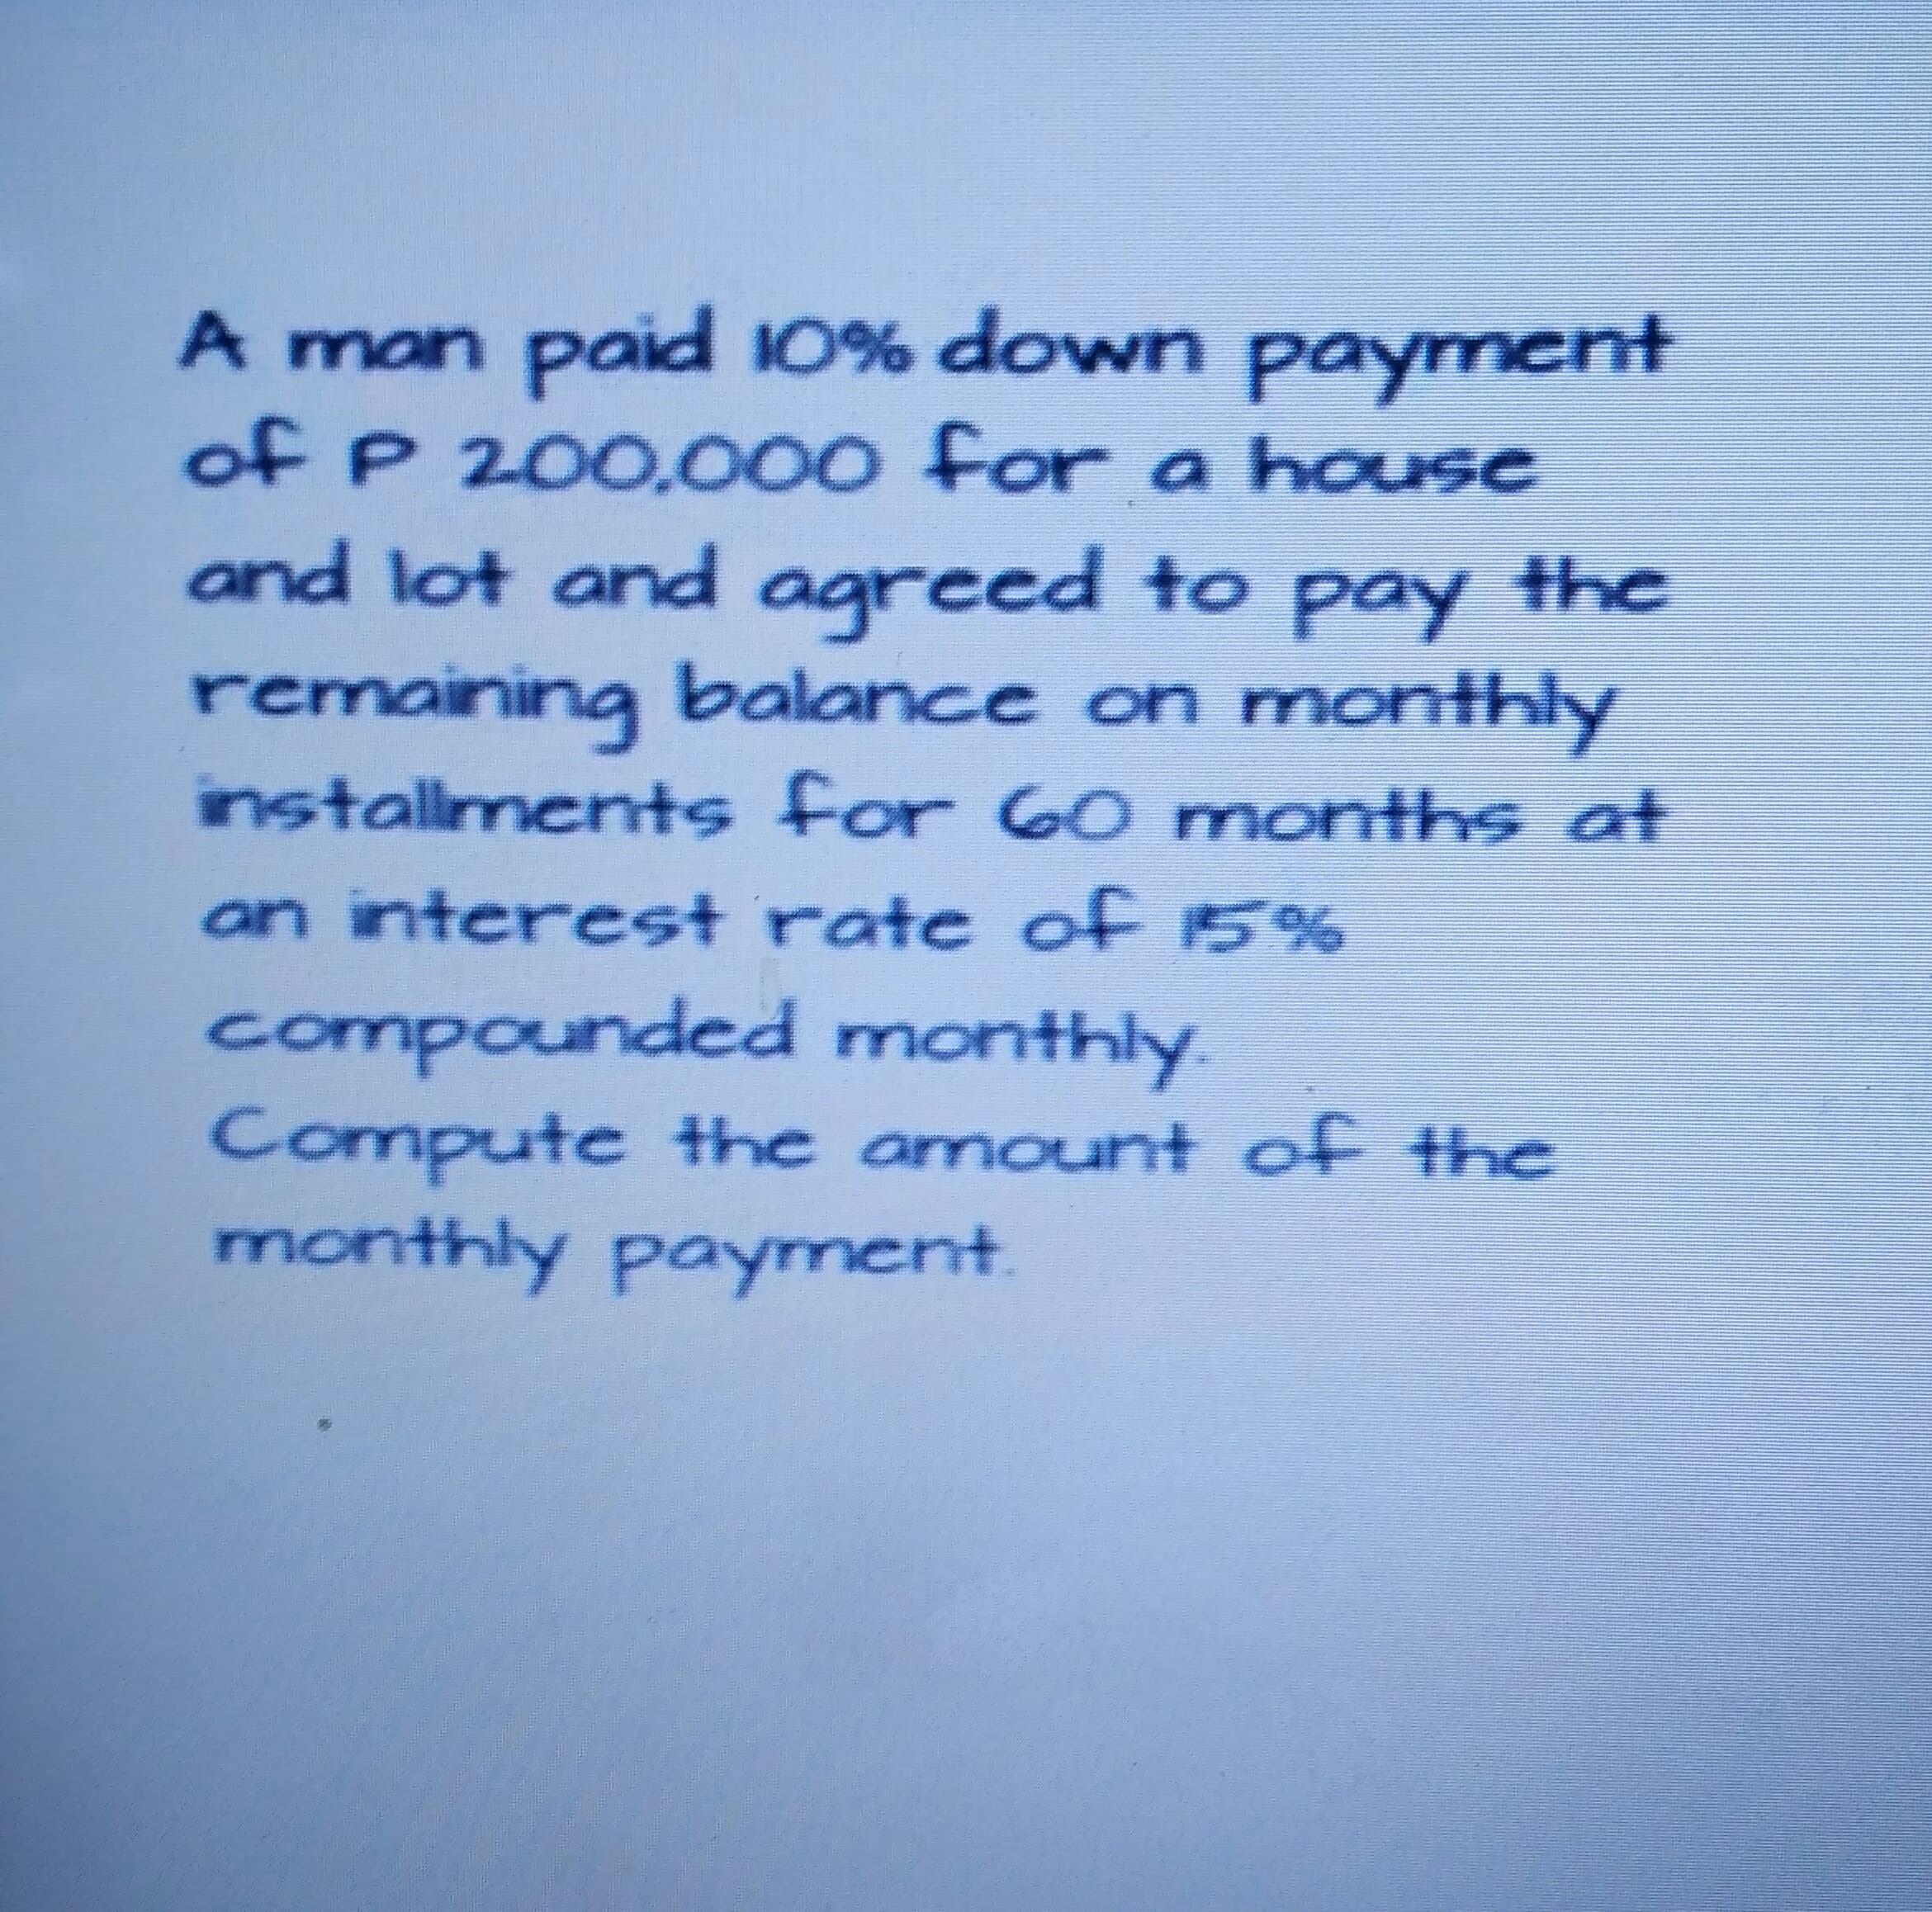 A man paid 10% down payment
of P 200.000 for a house
and lot and agreed to pay the
remaining balance on monthly
installments for 60 months at
an interest rate of 15%
compounded monthly.
Compute the amount of the
monthly payment.
